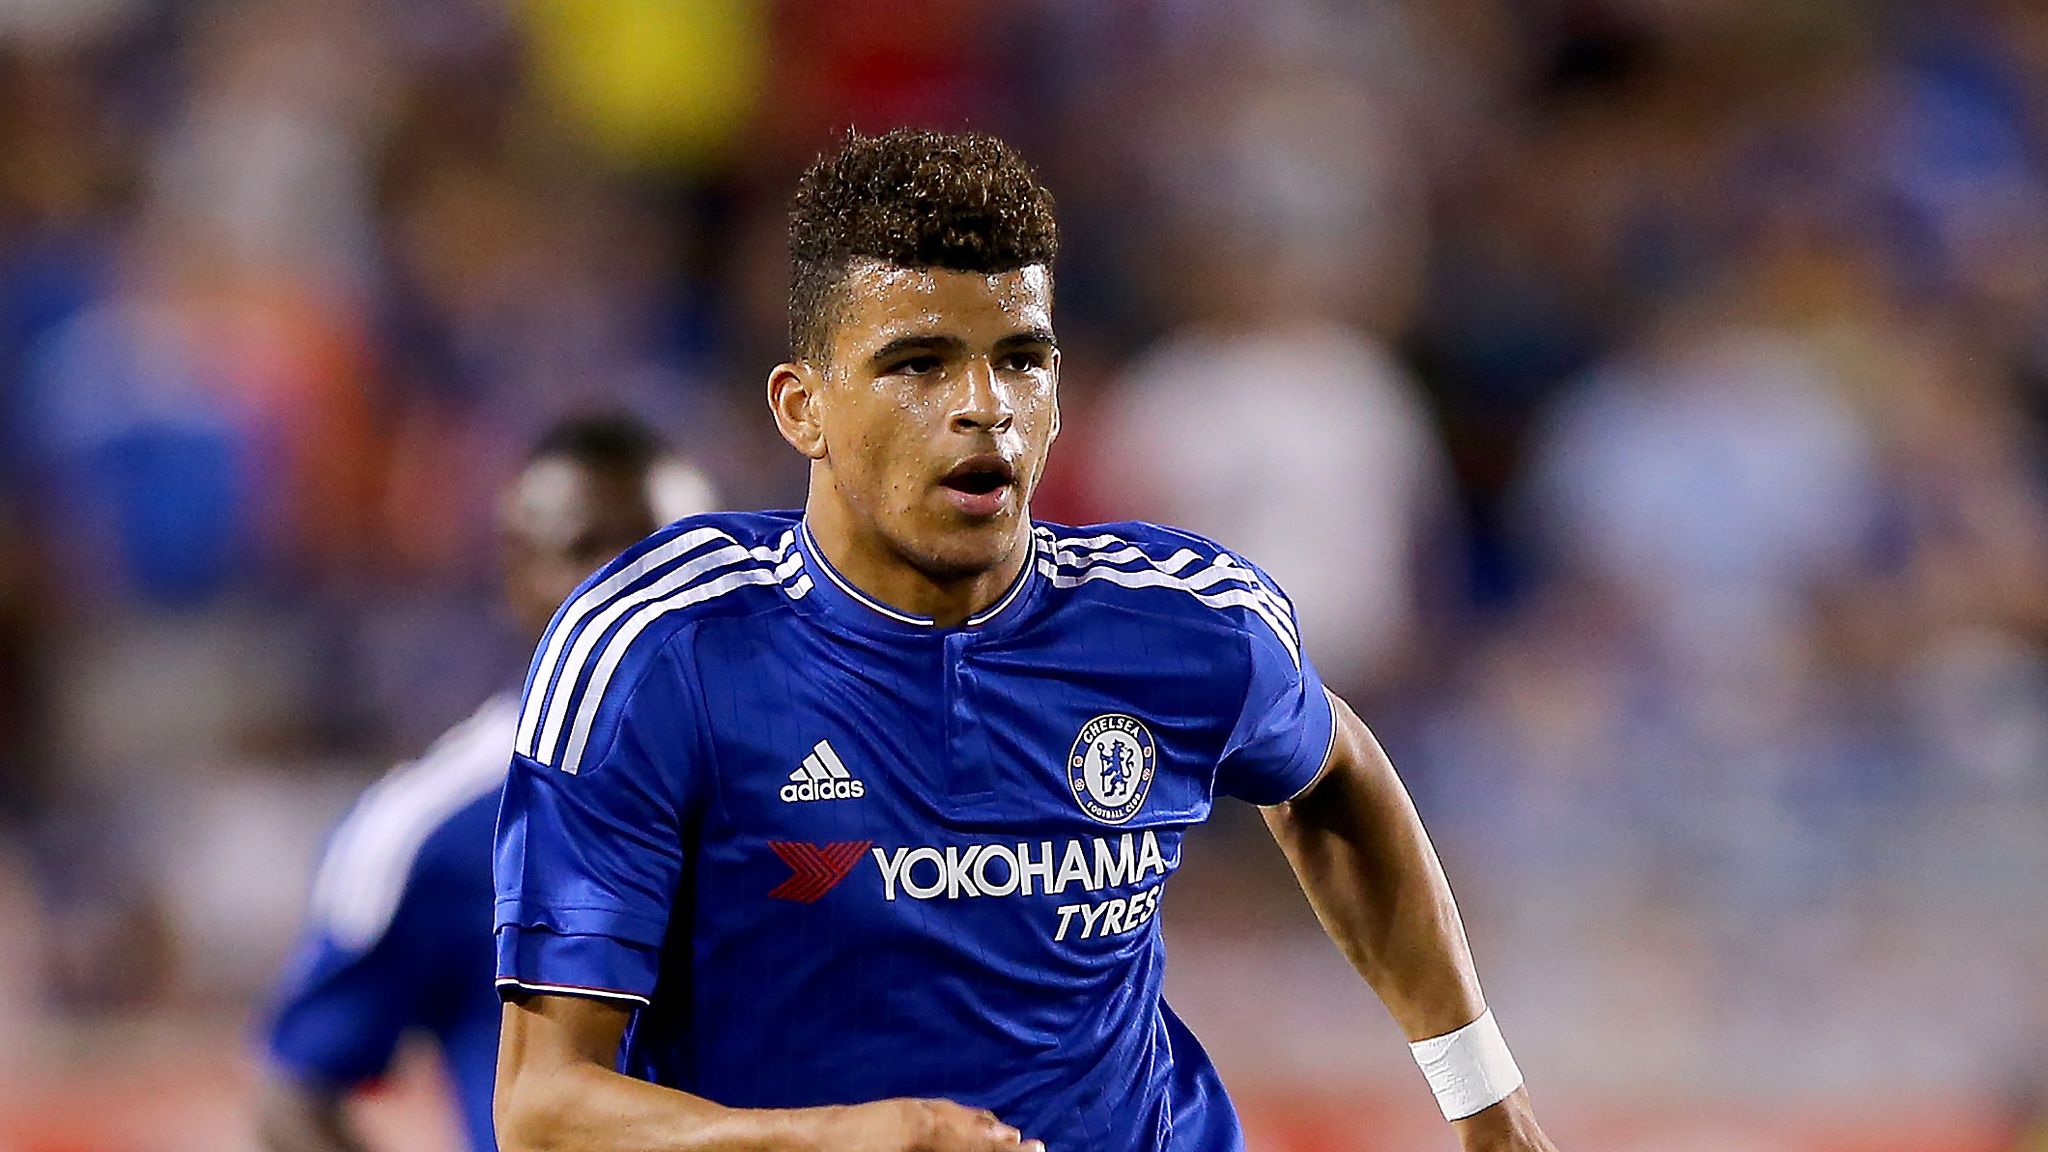 Dominic Solanke during his Chelsea days.